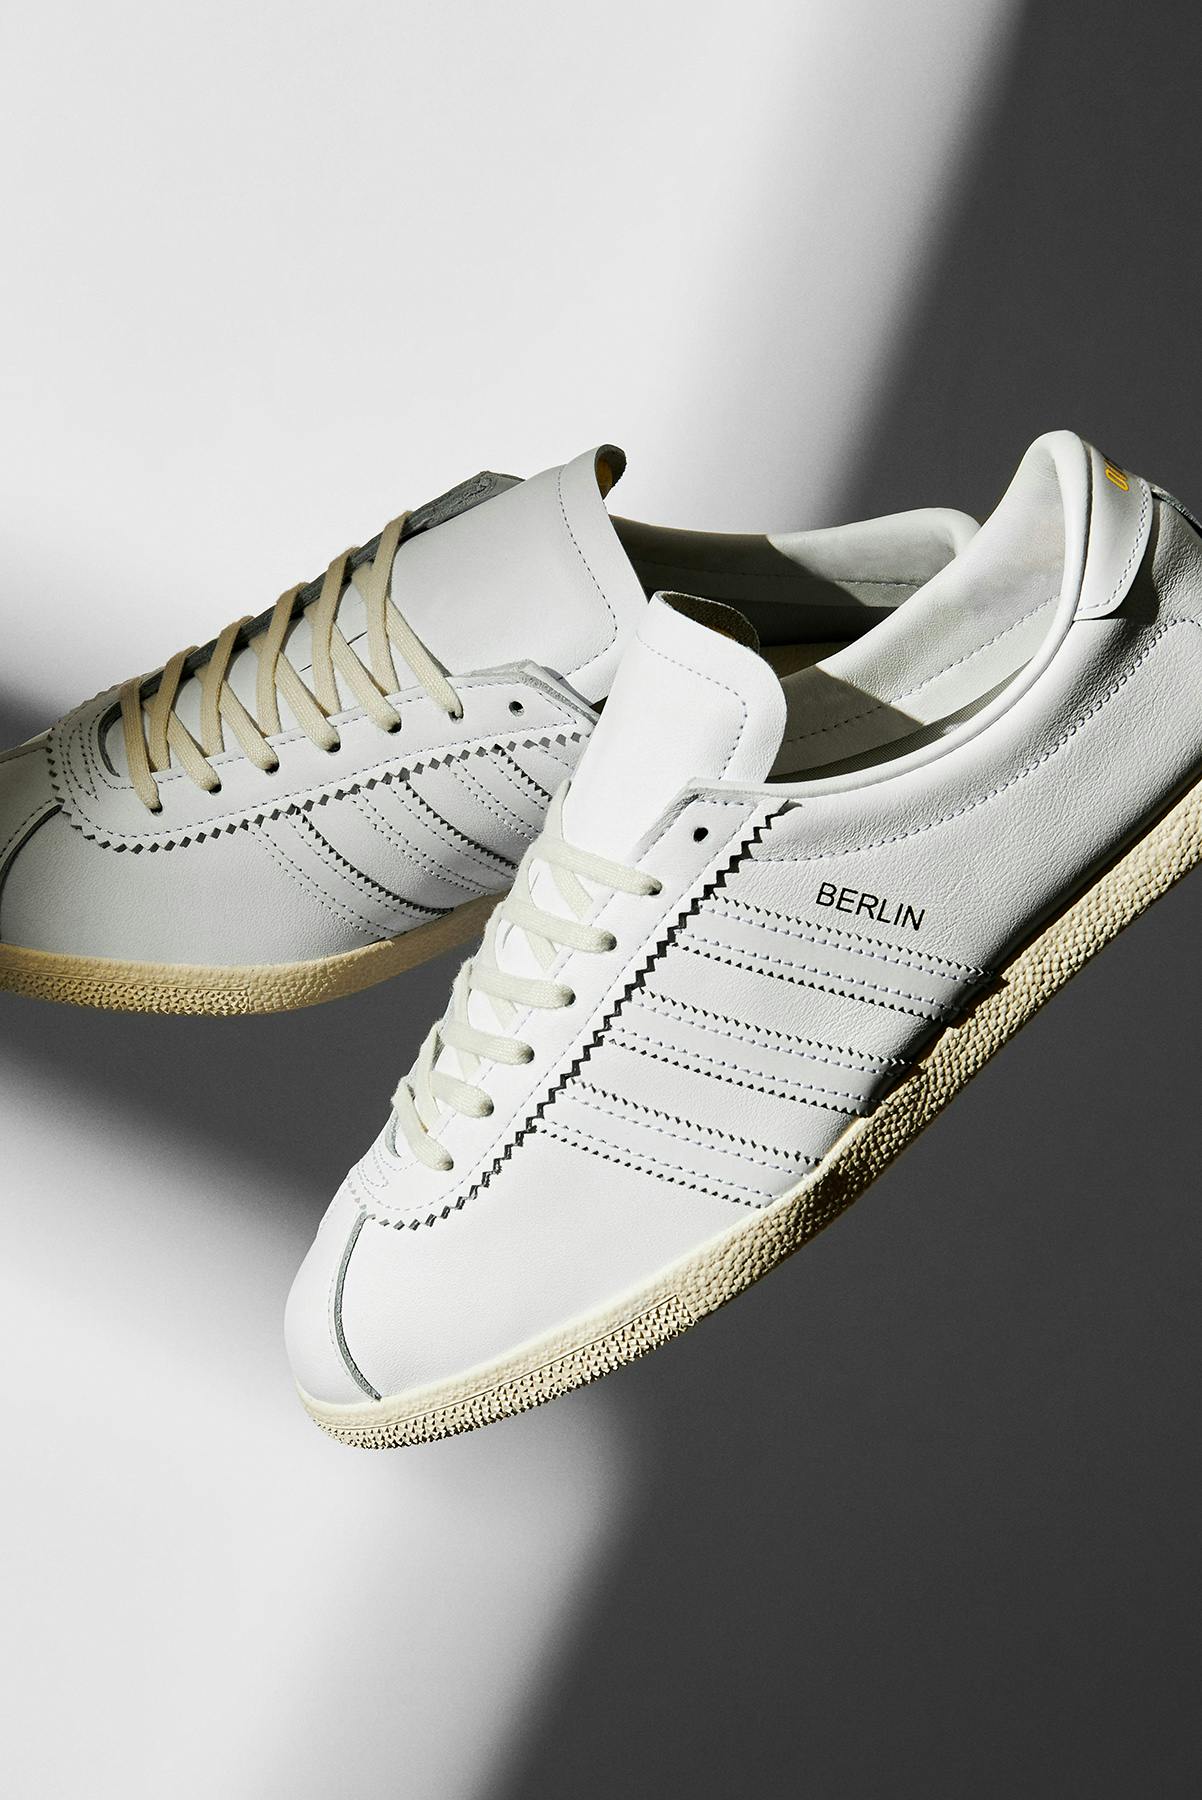 maximaliseren Ladder dubbele END. (US) X ADIDAS MADE IN GERMANY BERLIN | END. (US)